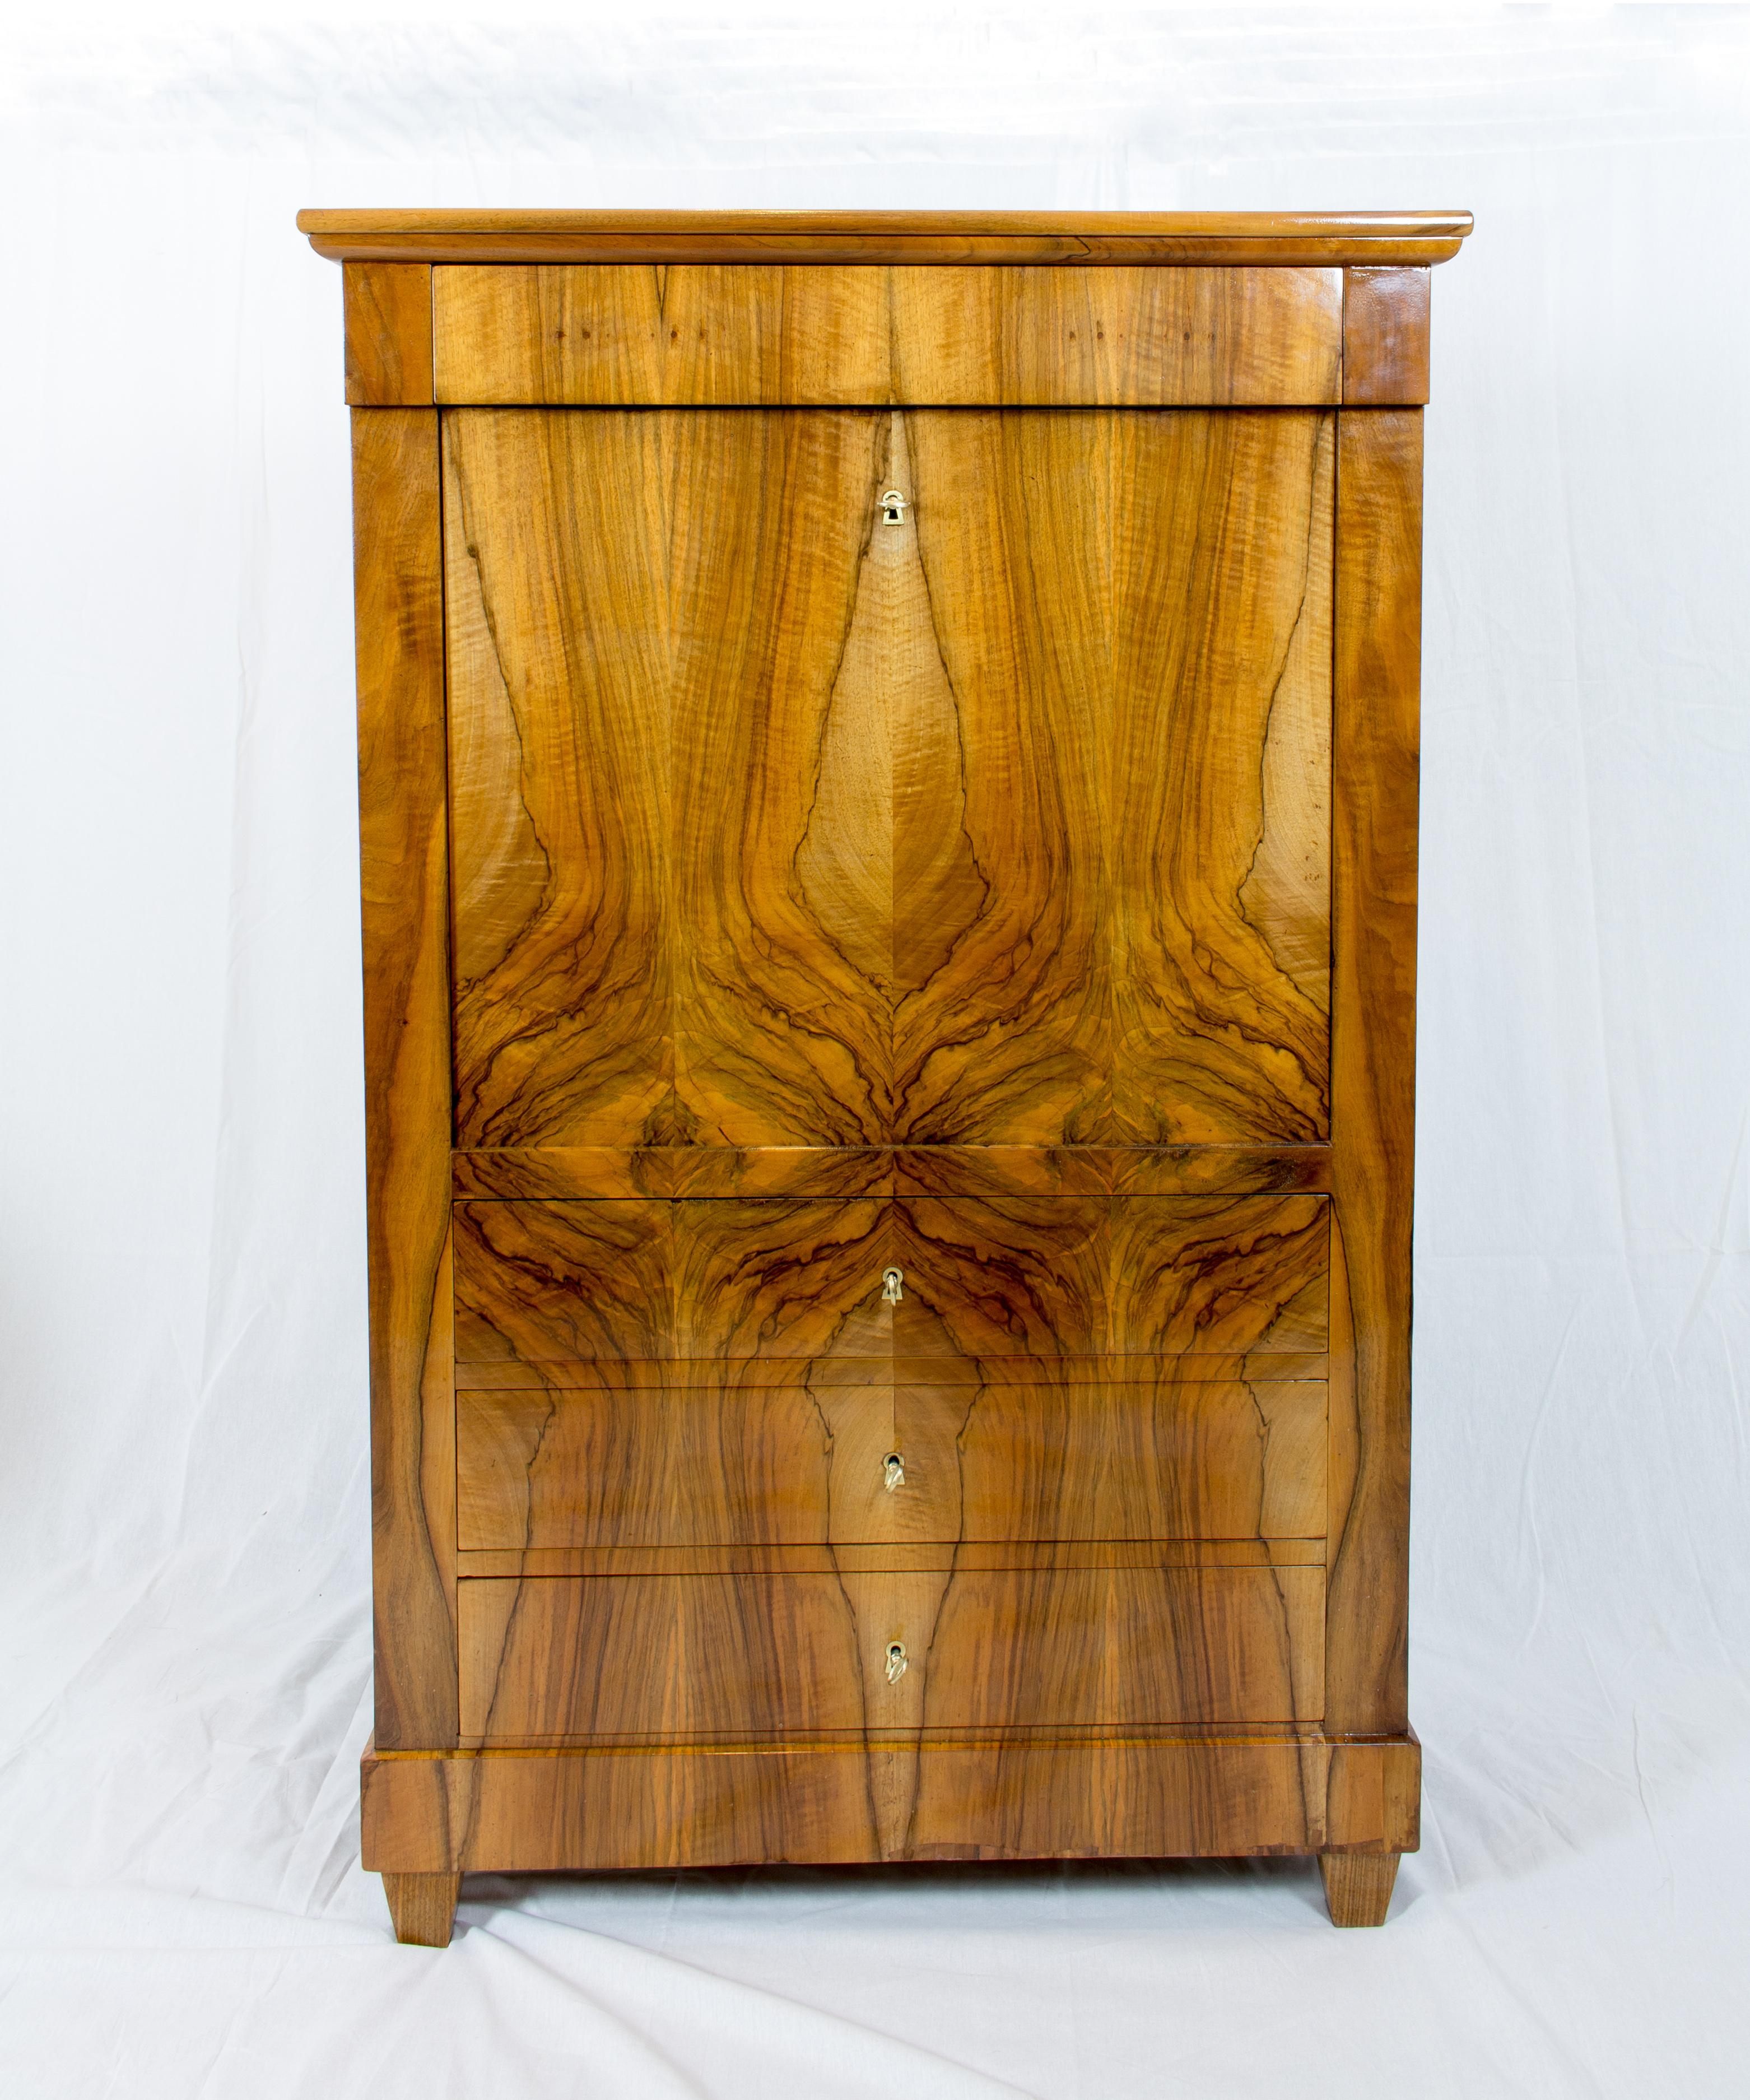 A beautiful small Secretaire made of walnut veneer from the time of Biedermeier. The Secretaire is outside covered with a beautiful walnut veneer picture and the interior is made of solid cherry wood. 
Under the middle lower drawers in the centre,